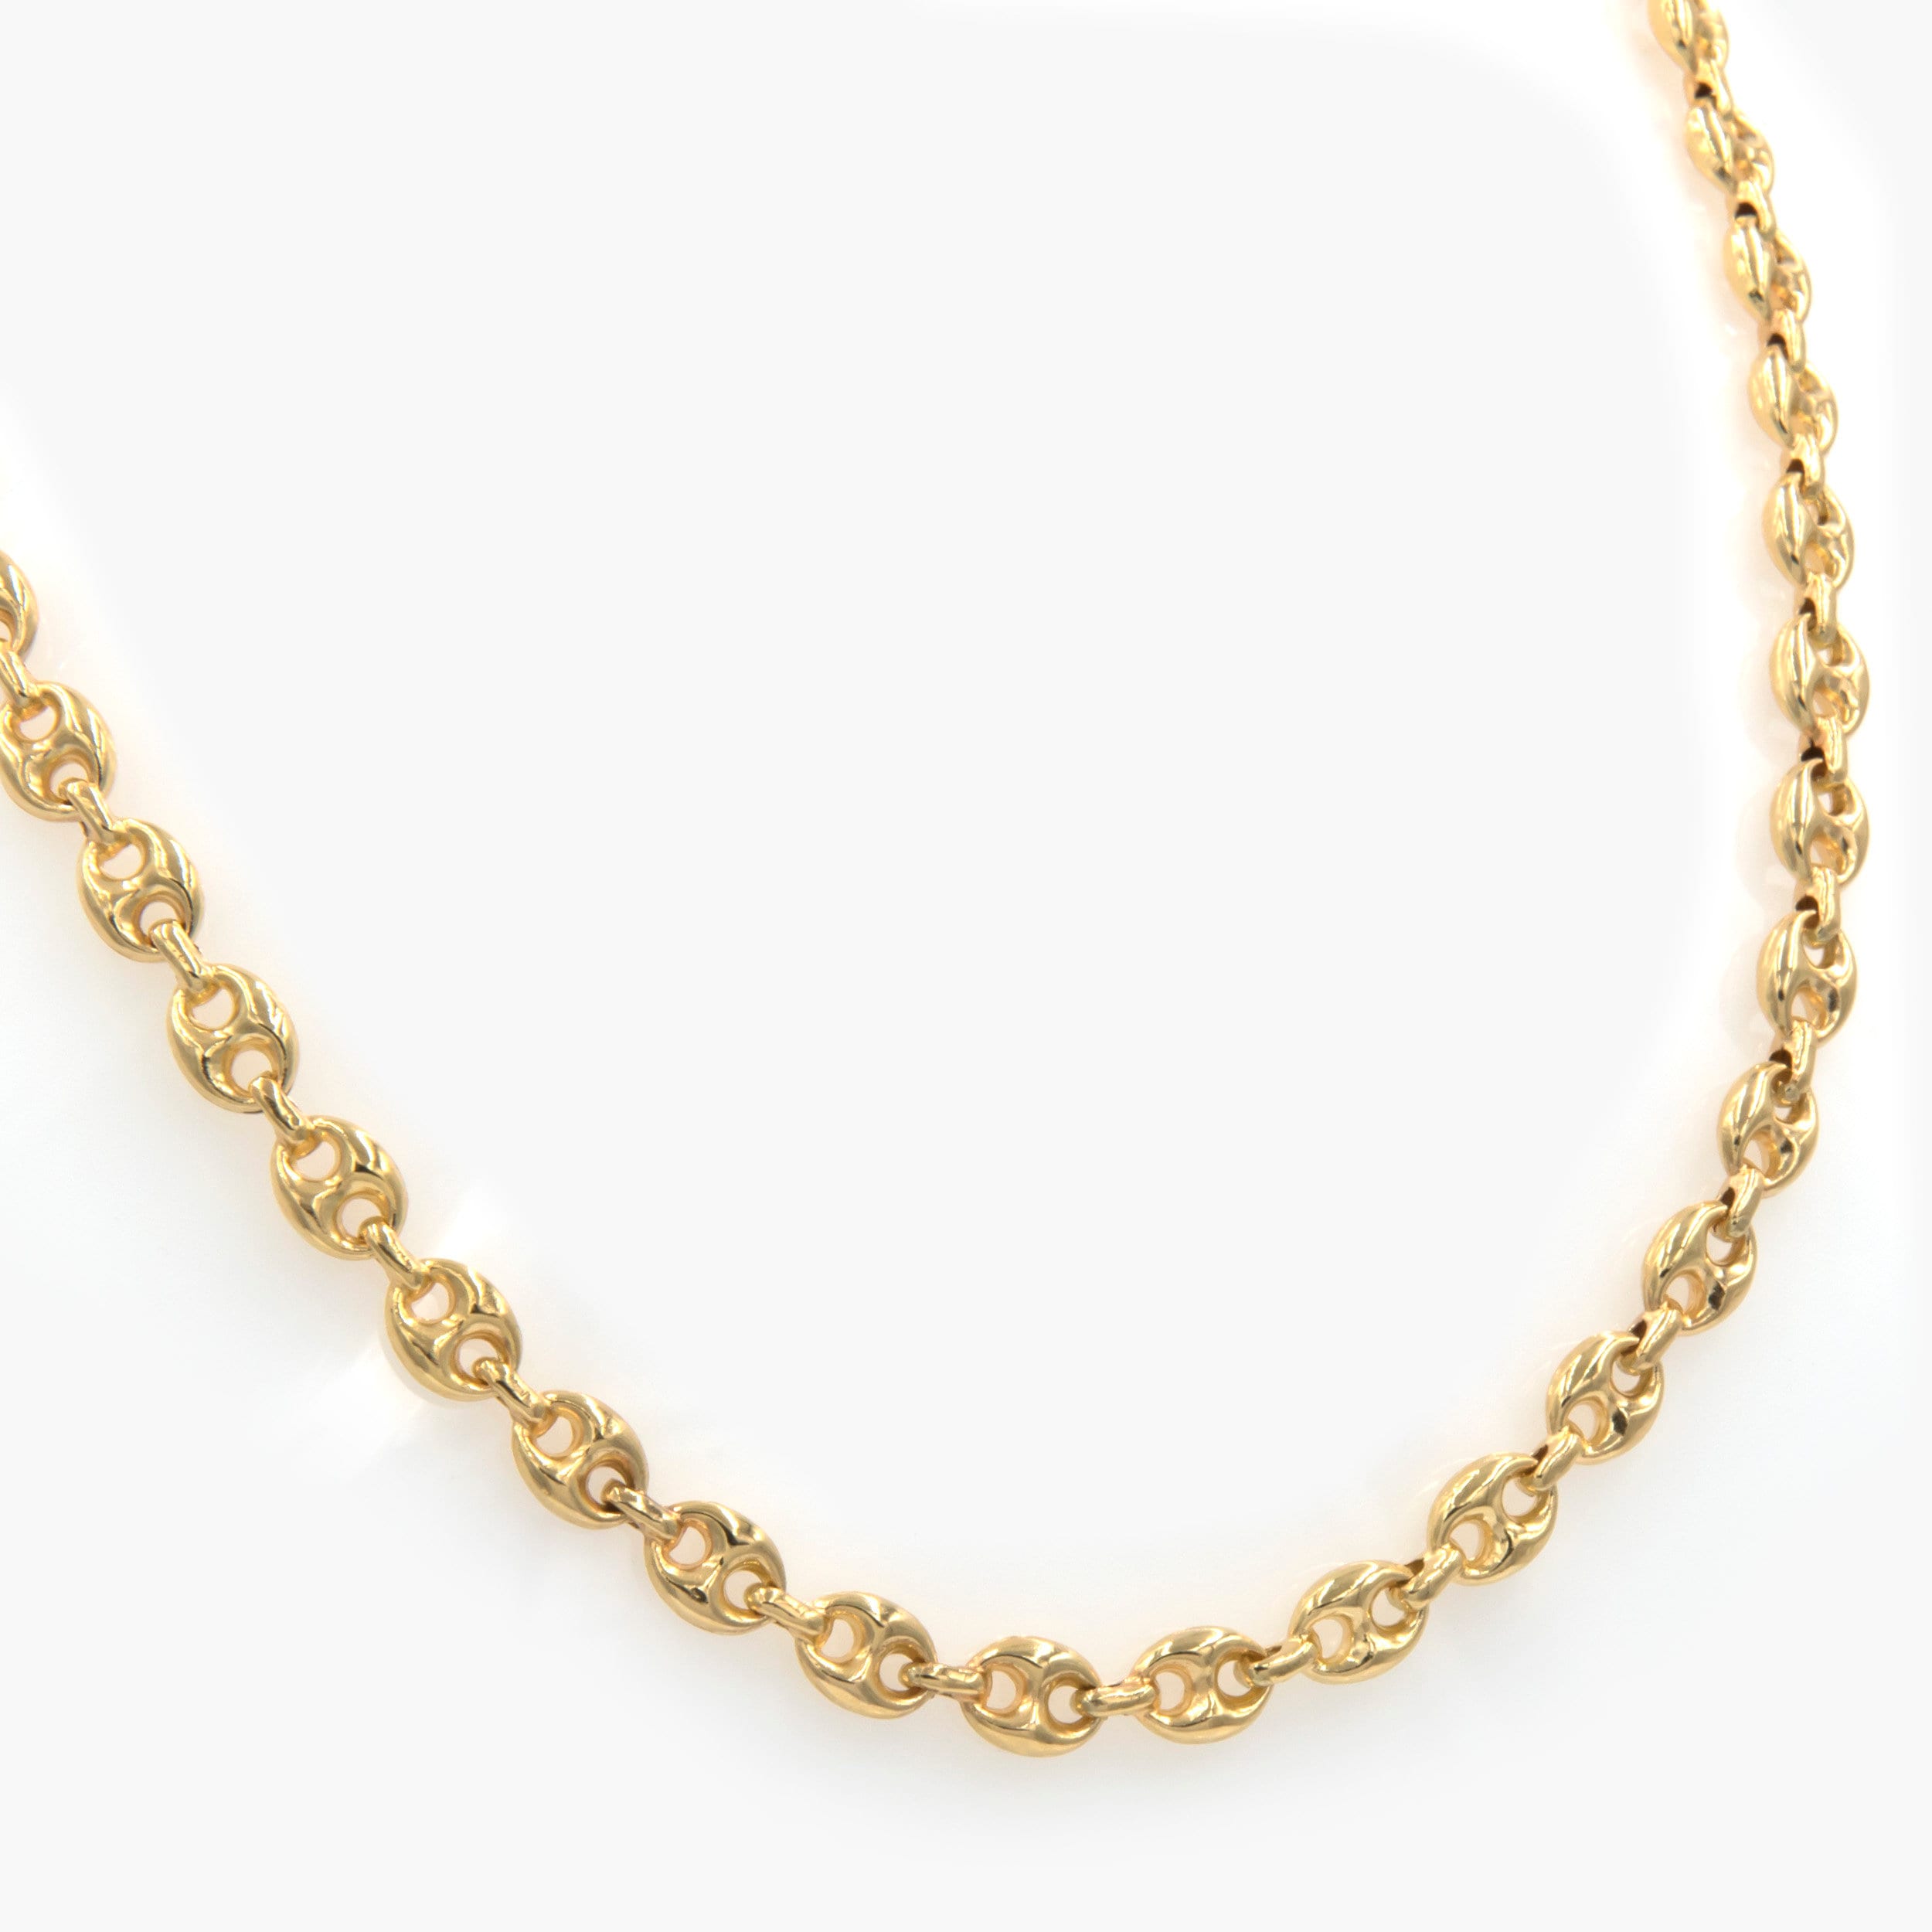 14KT Yellow Gold Puff Gucci Link Bracelet - Carbo Jewelers